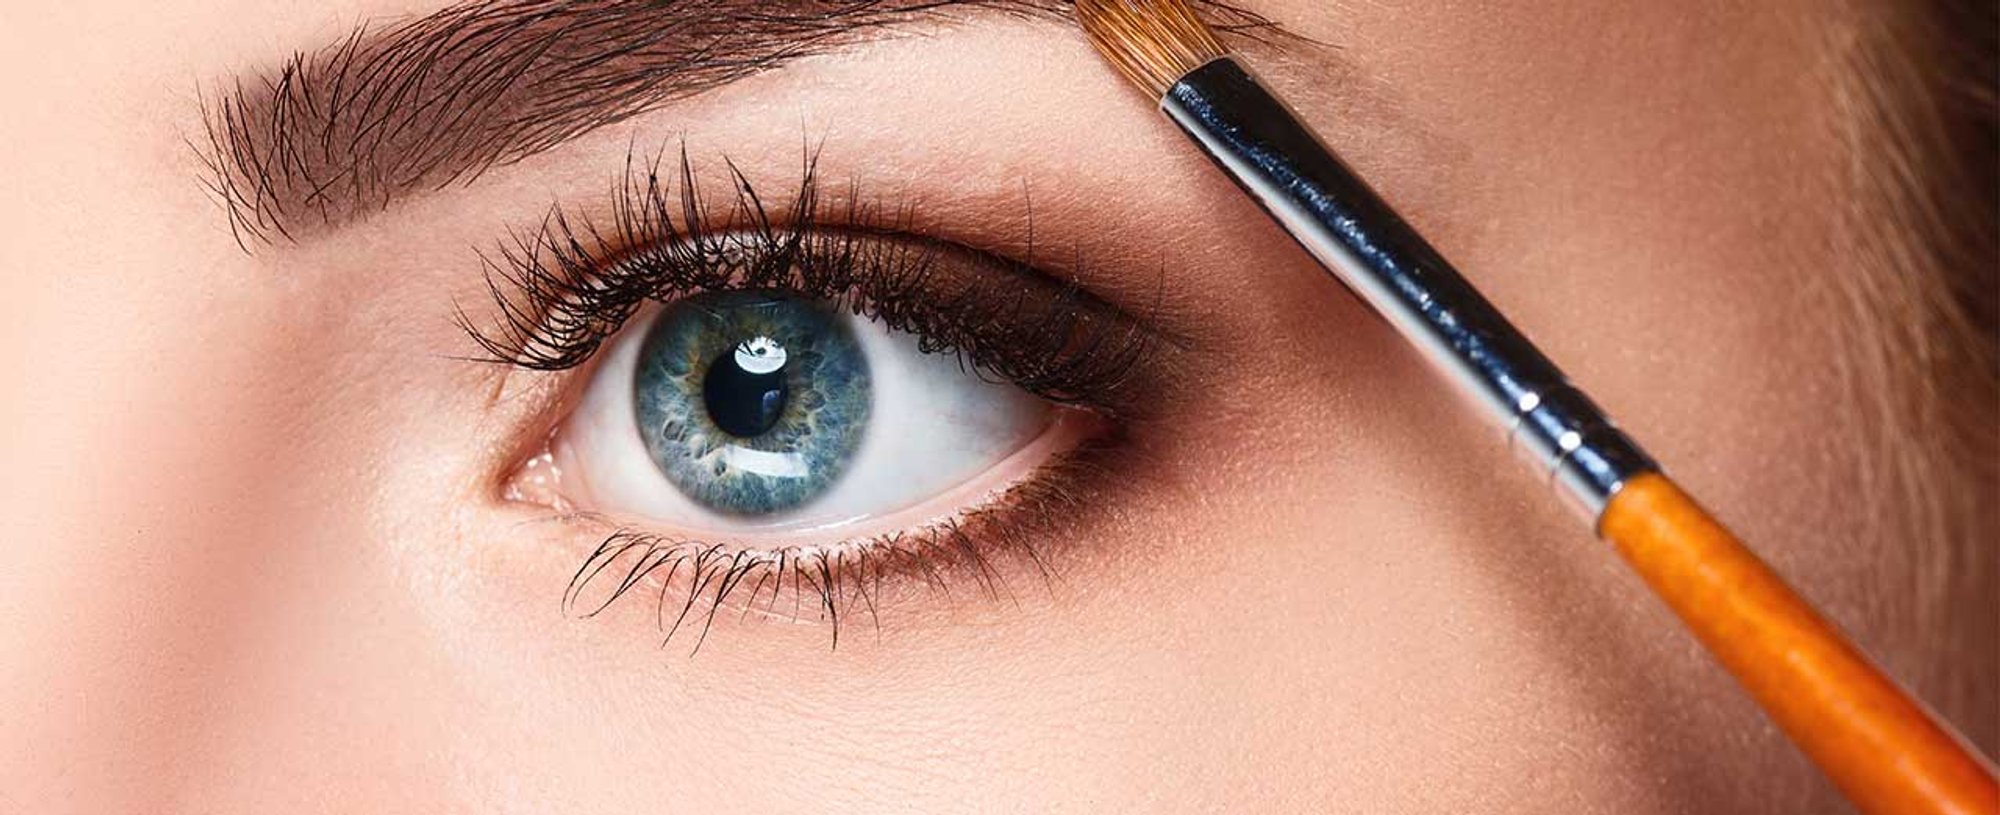 6 Eyebrow Mistakes To Stop Making Right Now - L'Oréal Paris